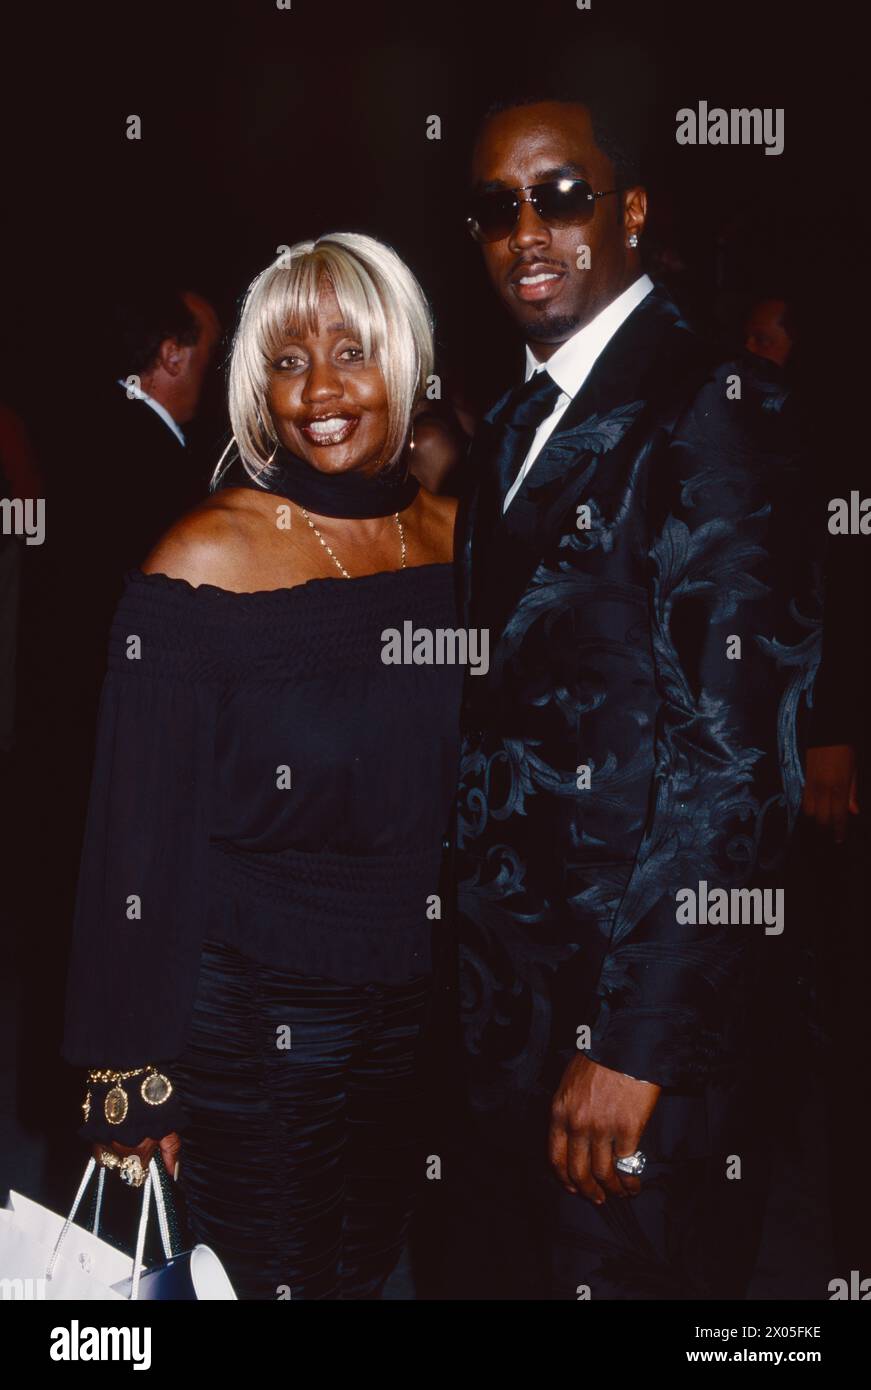 Janice Combs and Sean 'P. Diddy' Combs attend the 2002 CFDA Fashion Awards at The New York Public Library in New York City on June 3, 2002.  Photo Credit: Henry McGee/MediaPunch Stock Photo